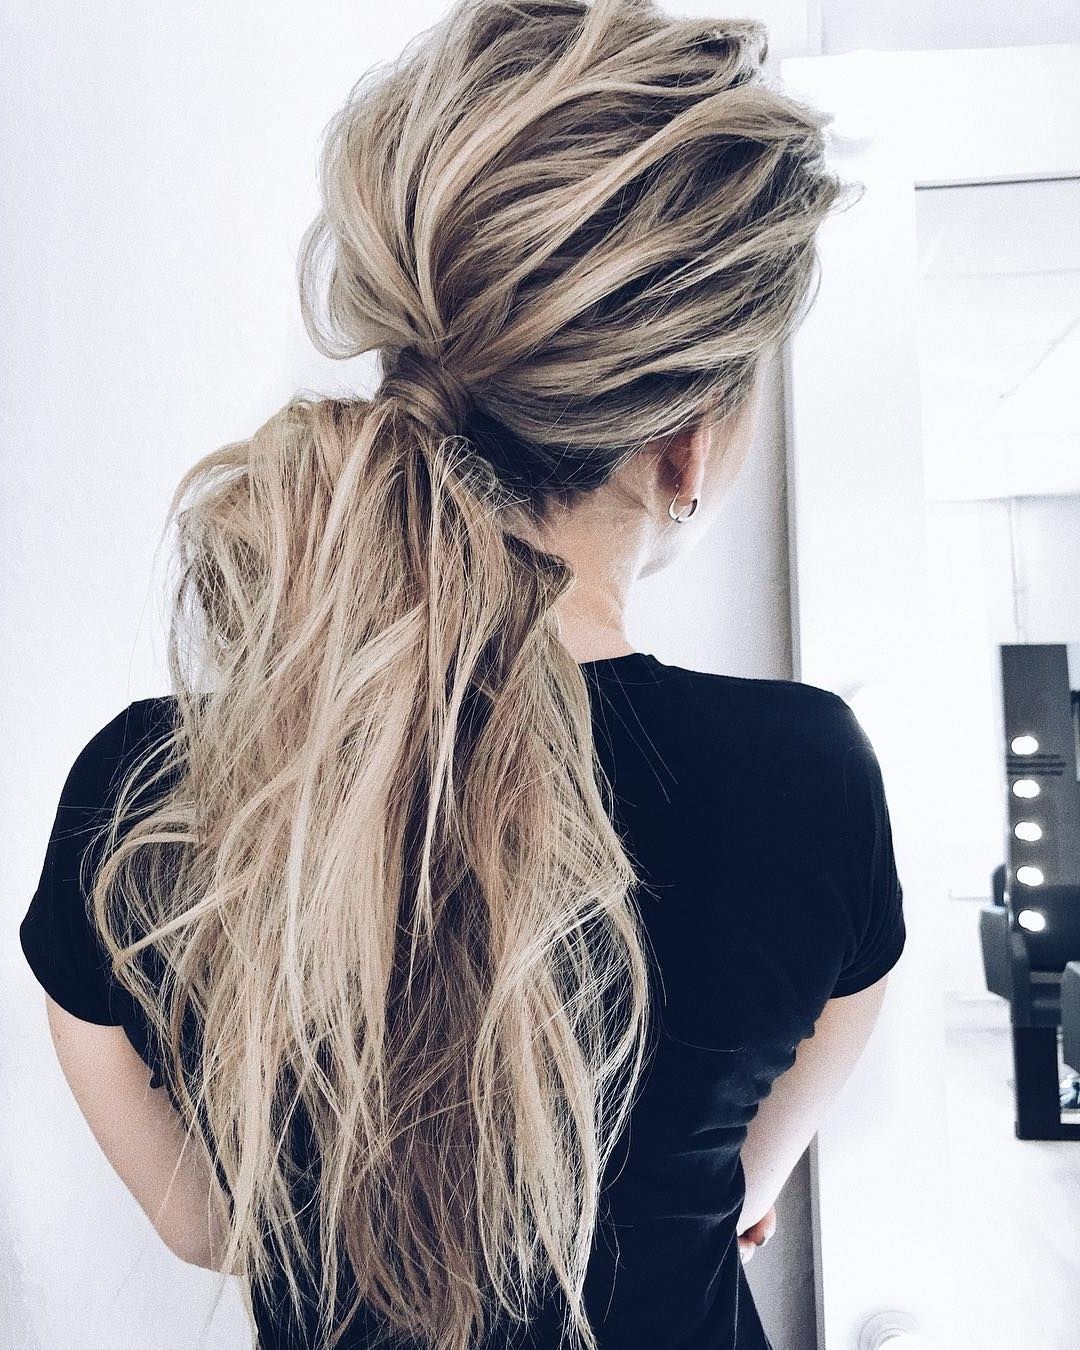 10 Creative Ponytail Hairstyles For Long Hair, Summer Hairstyle For Popular Creative Side Ponytail Hairstyles (View 7 of 20)